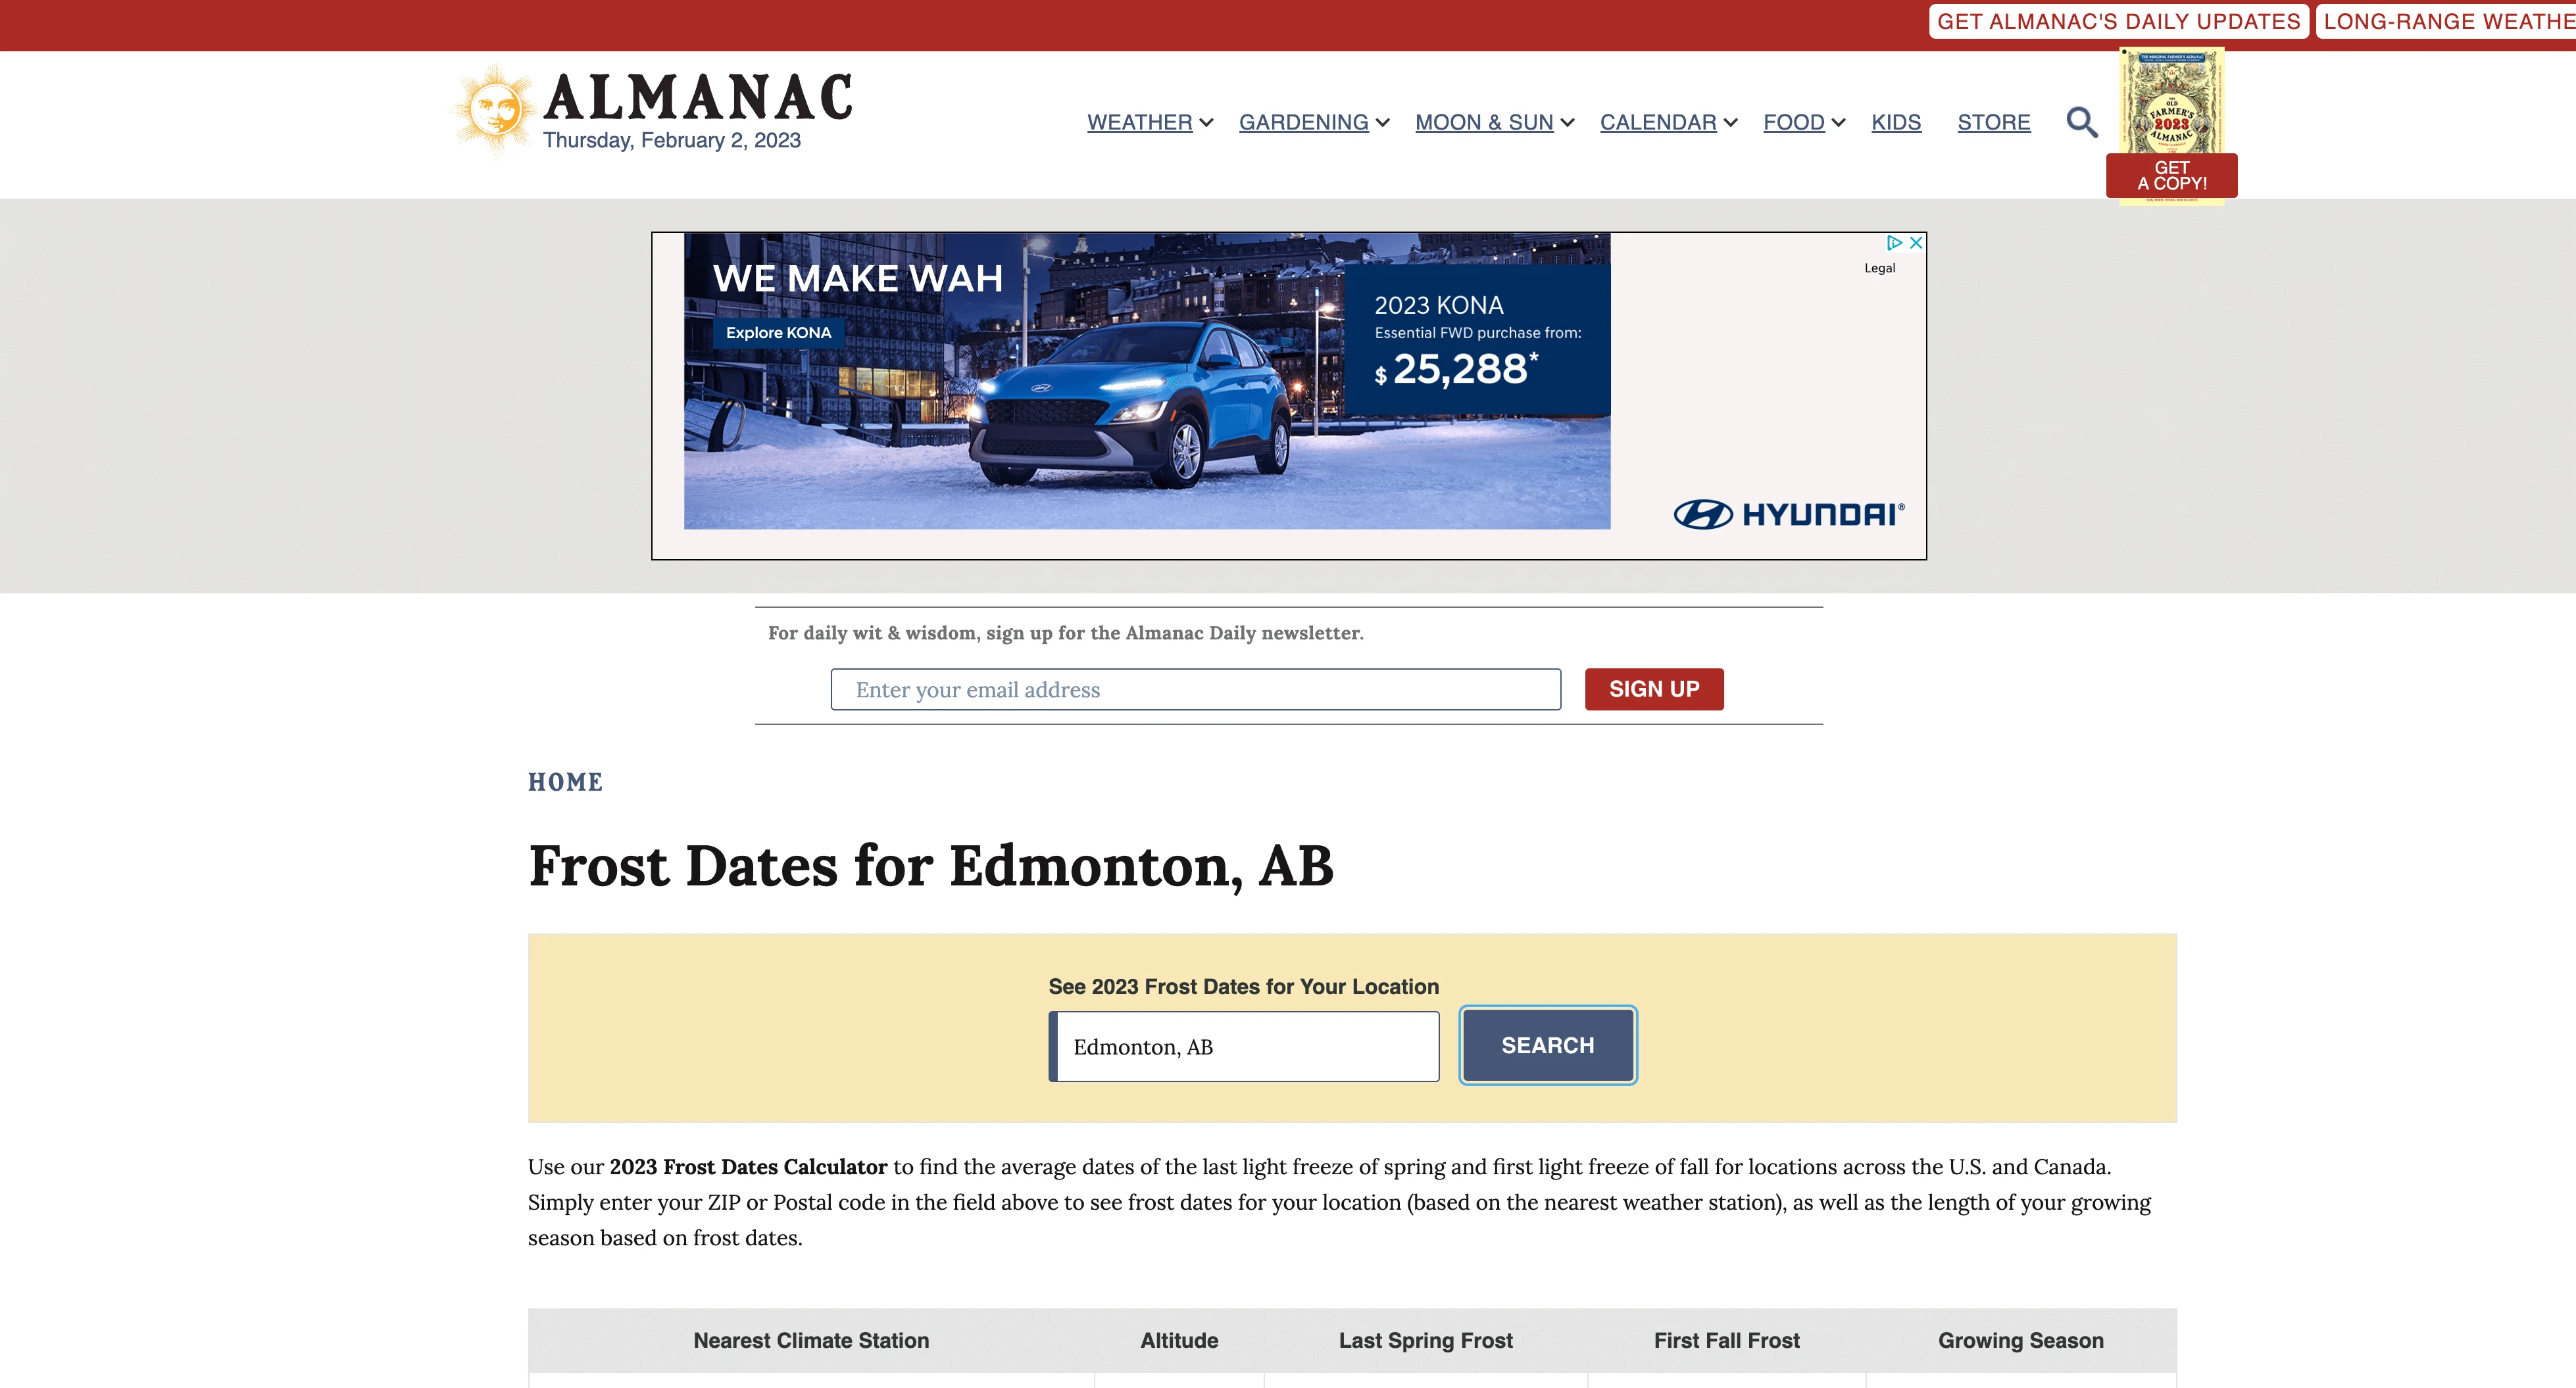 Finding frost dates on the Almanac website. 